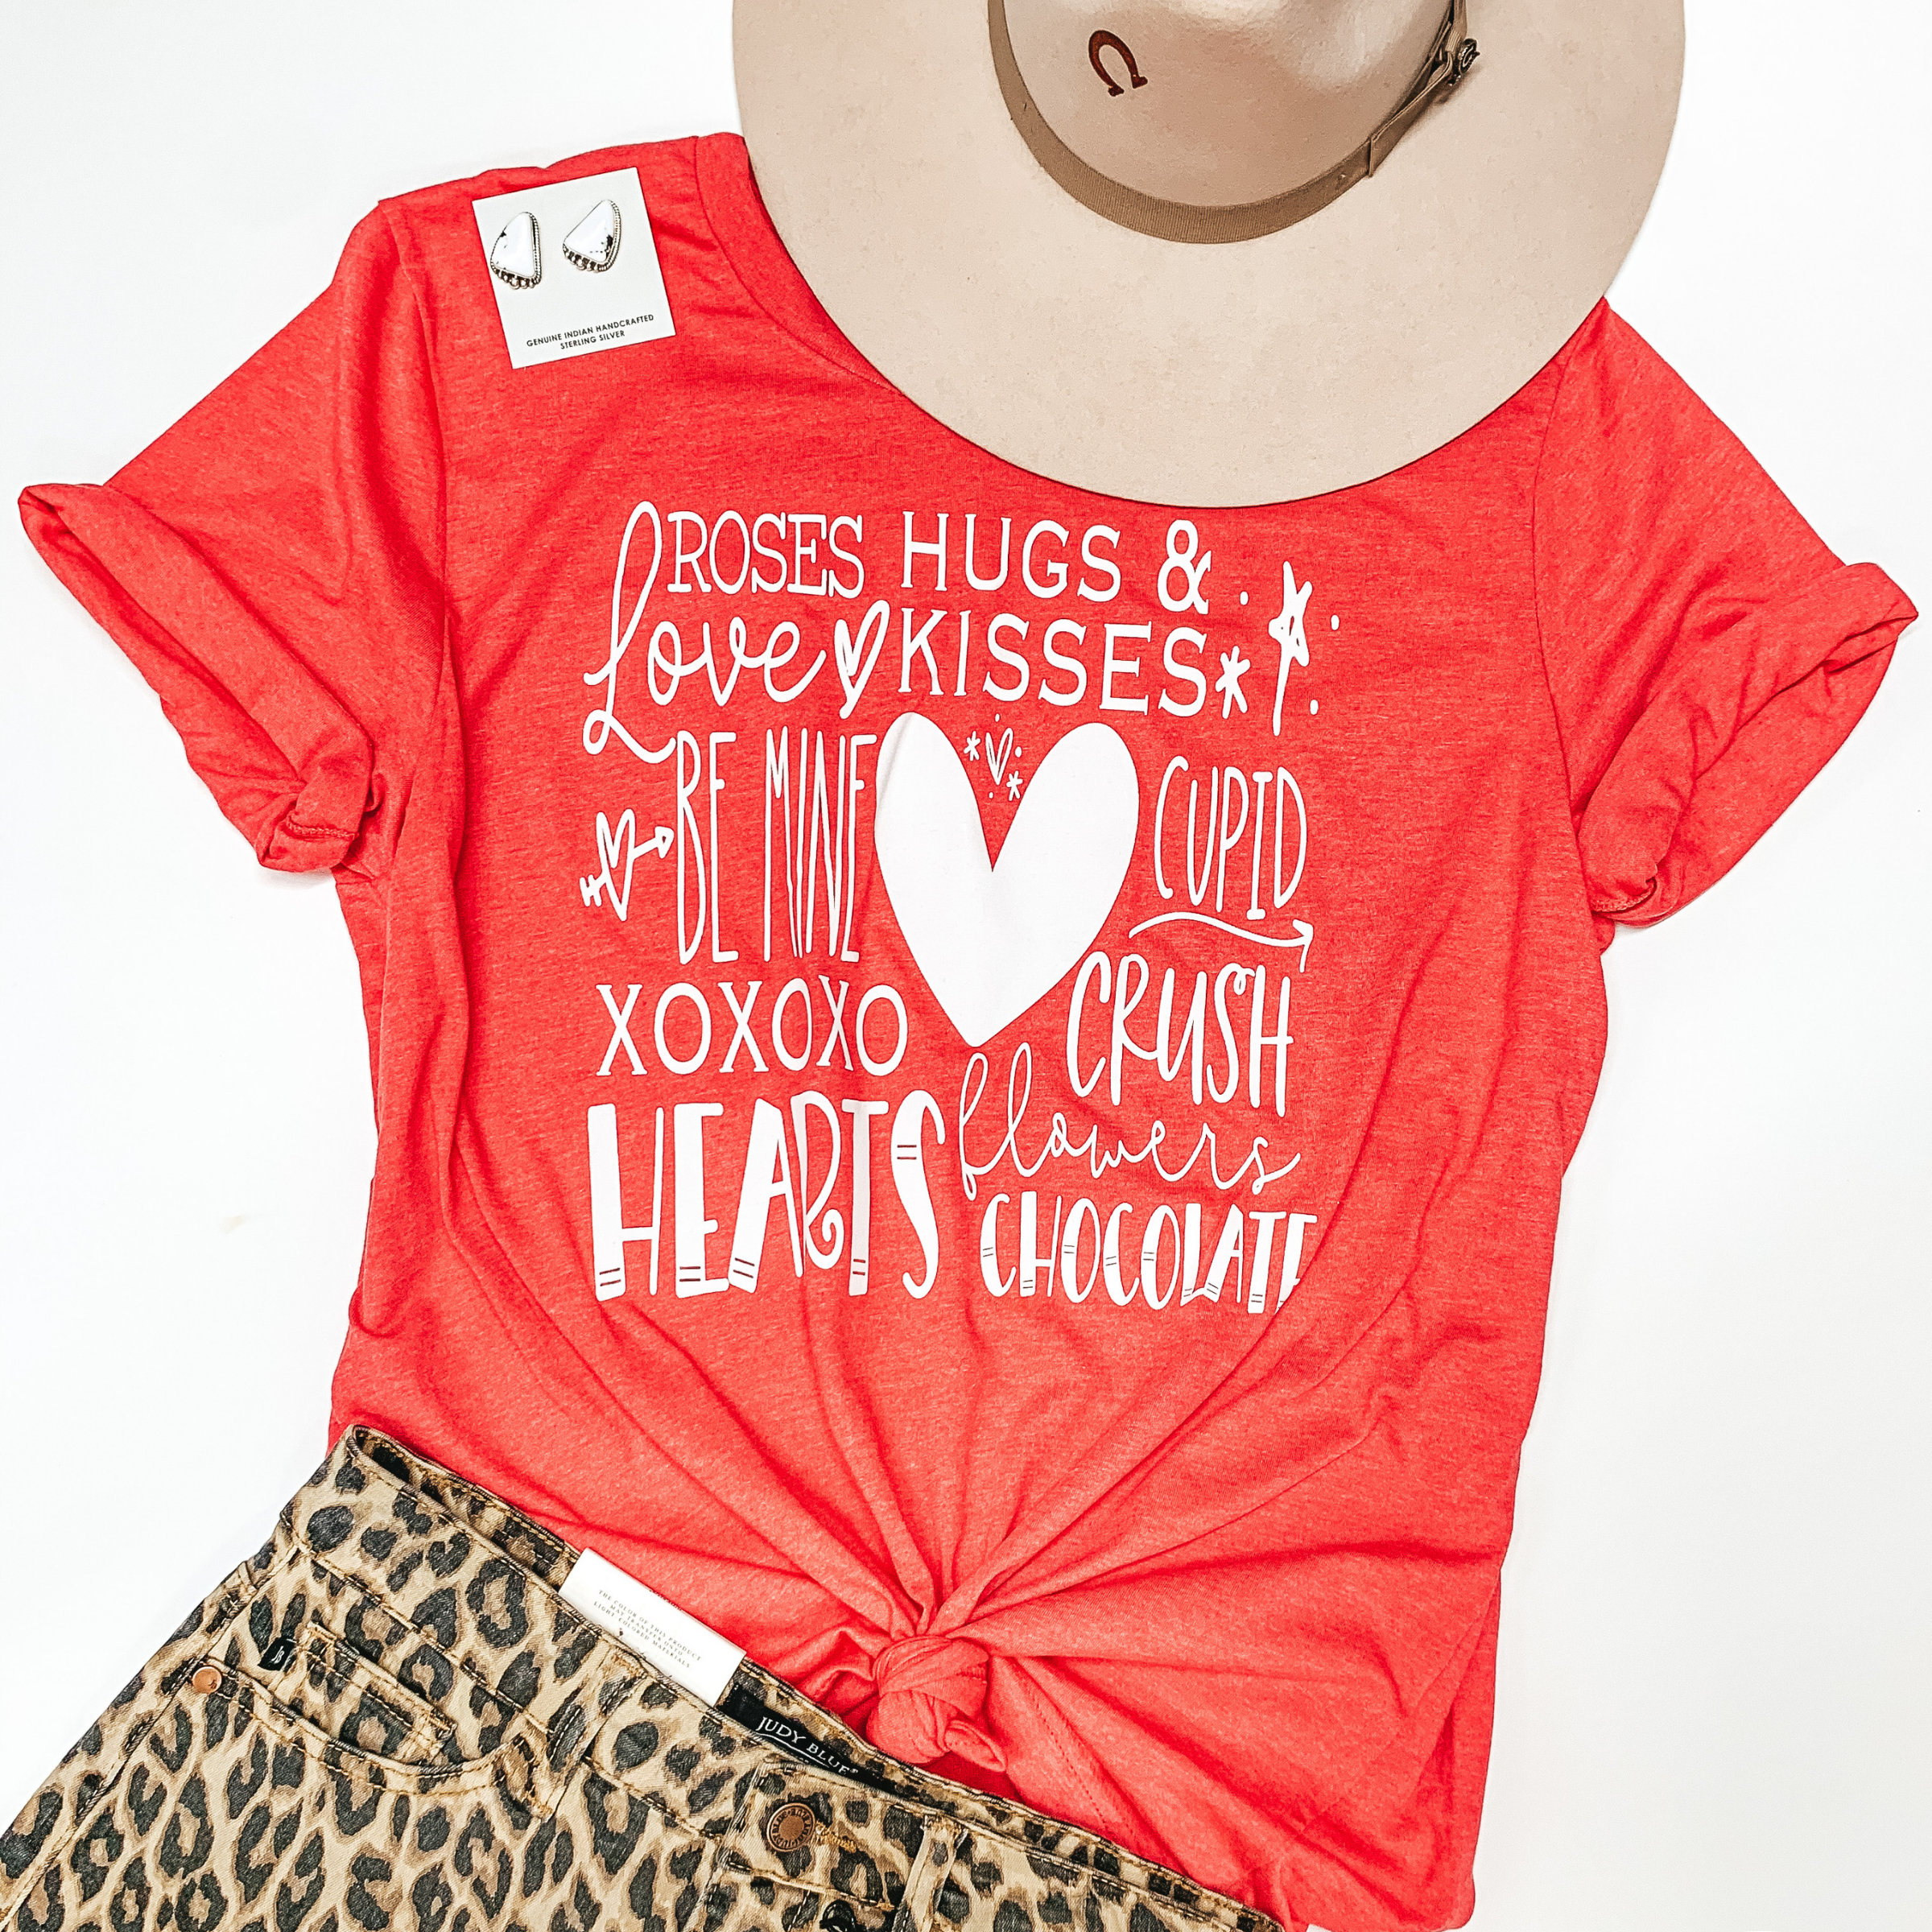 Roses, Hugs, & Kisses Crew Neck Graphic Tee in Heather Red - Giddy Up Glamour Boutique